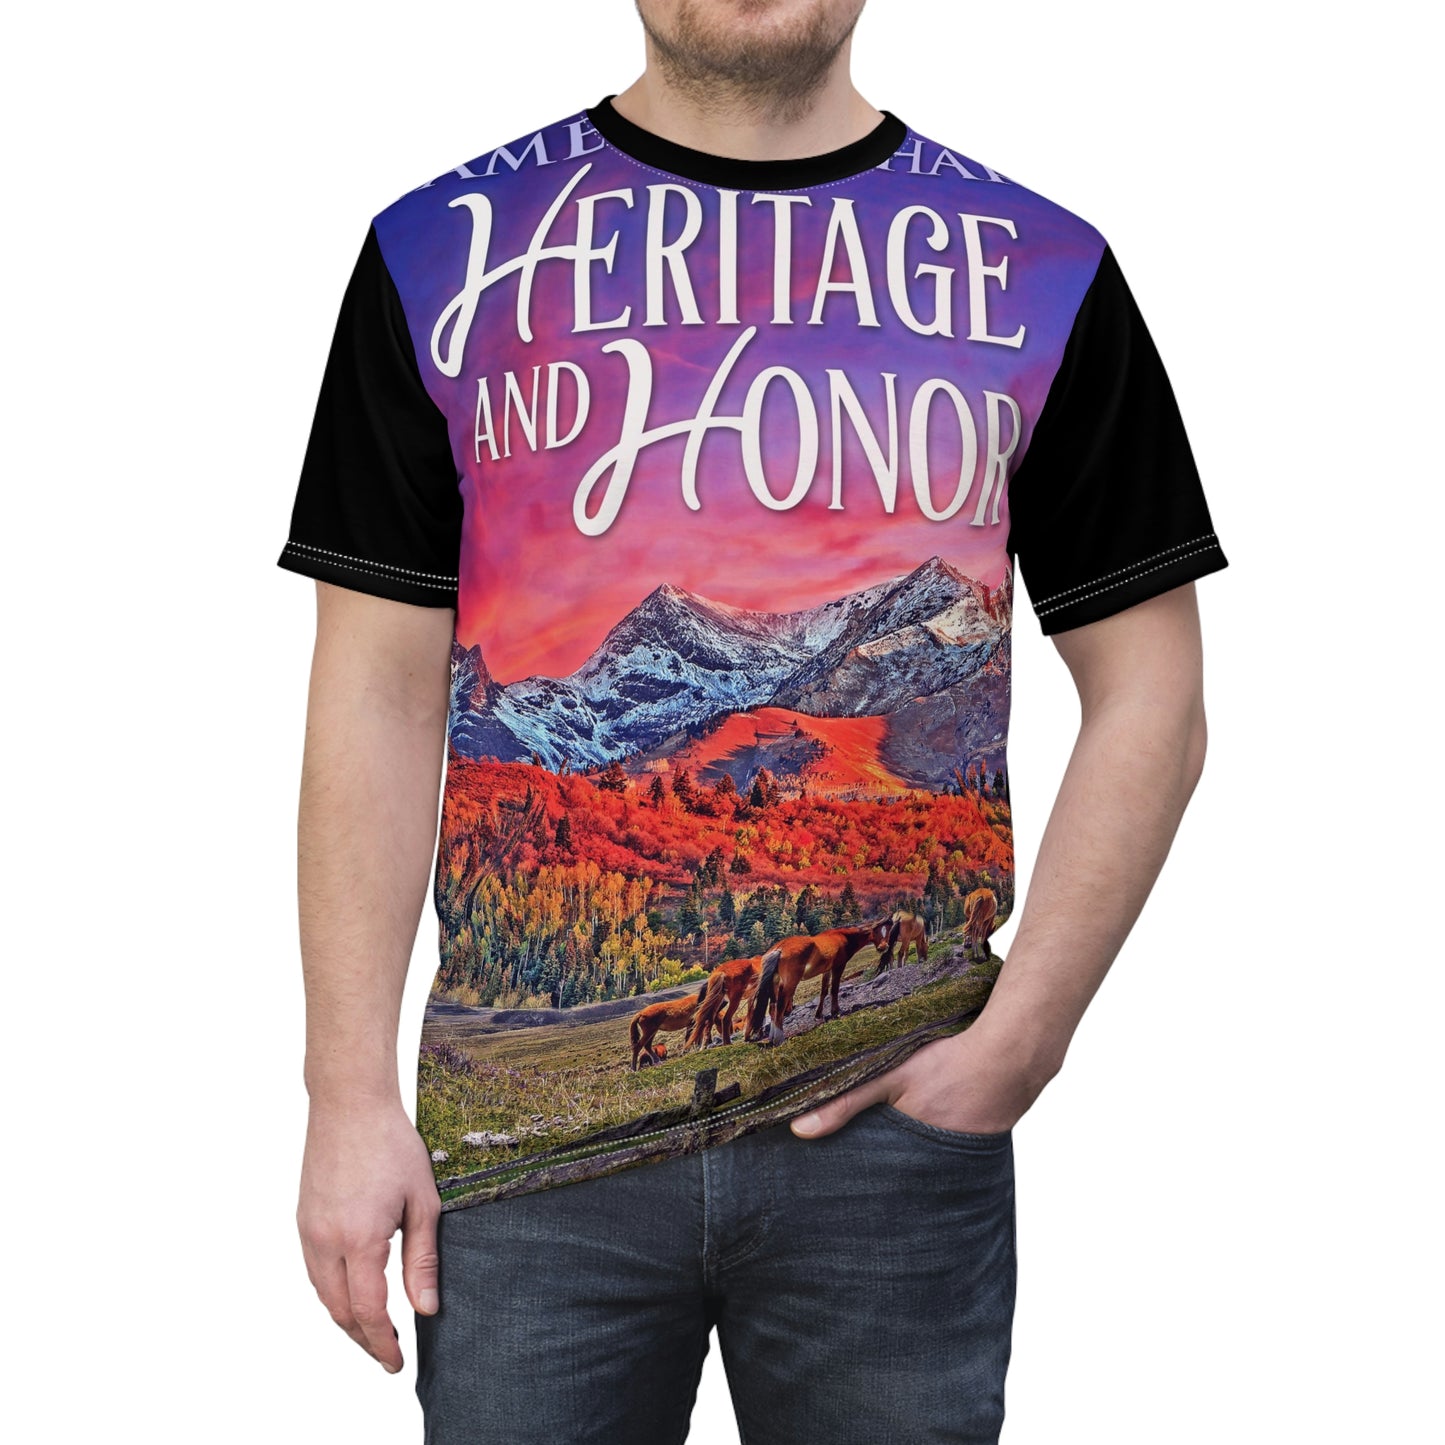 Heritage And Honor - Unisex All-Over Print Cut & Sew T-Shirt